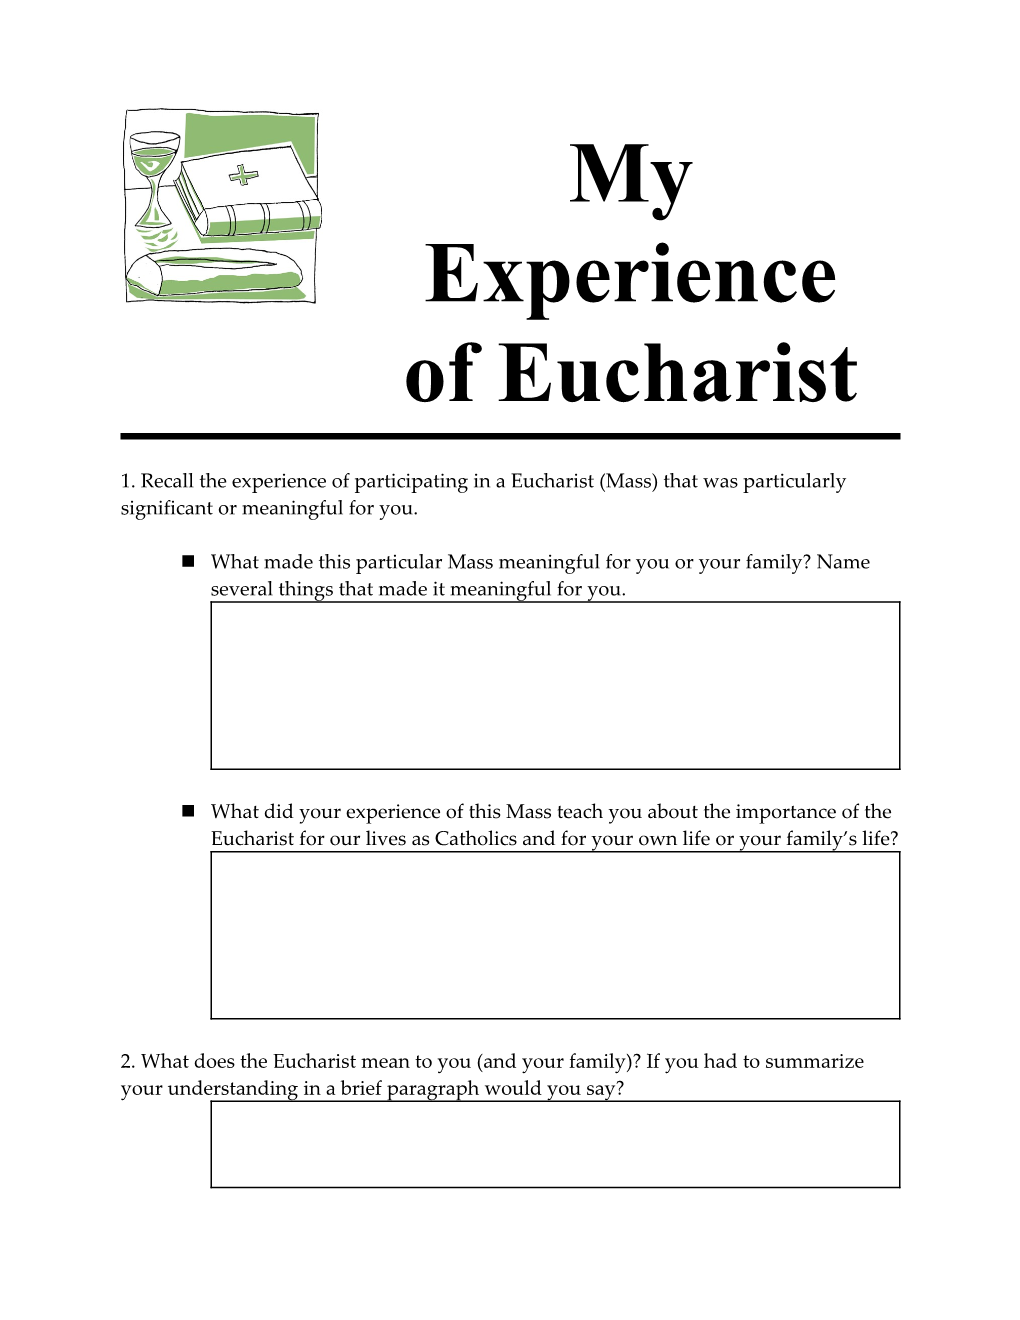 1. Recall the Experience of Participating in a Eucharist (Mass) That Was Particularly